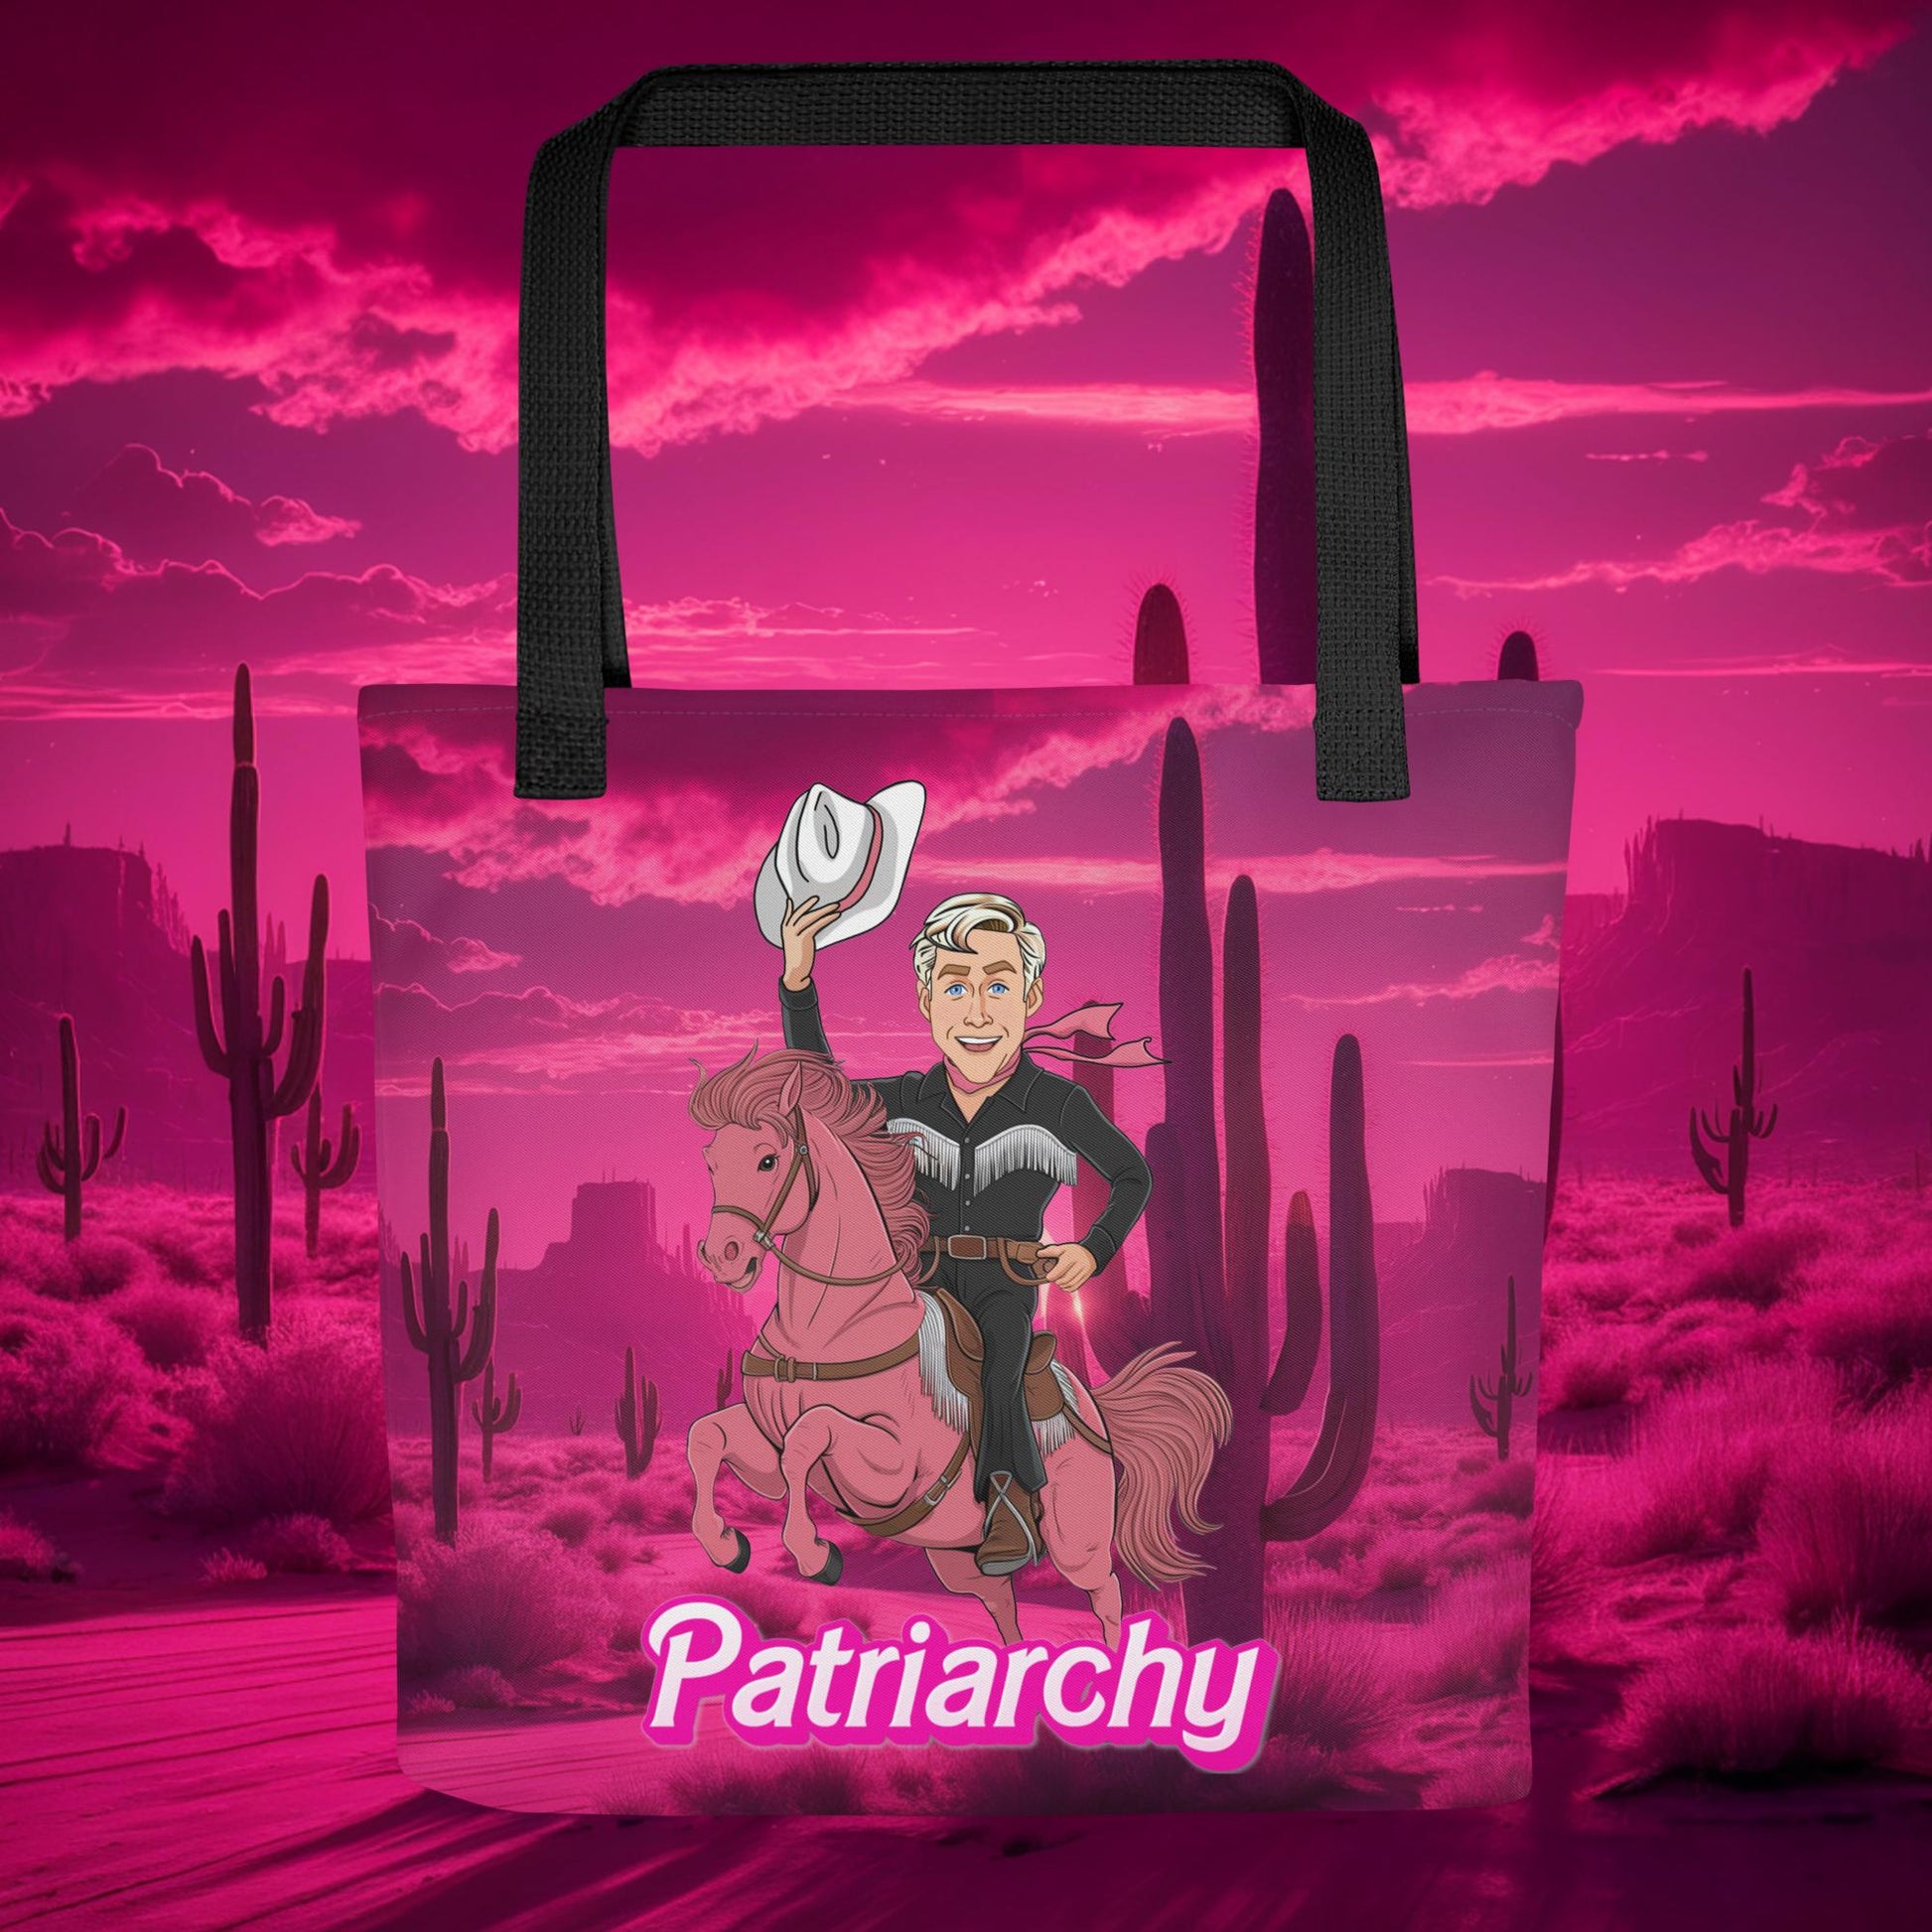 Ken Barbie Movie When I found out the patriarchy wasn't just about horses, I lost interest Tote bag Next Cult Brand